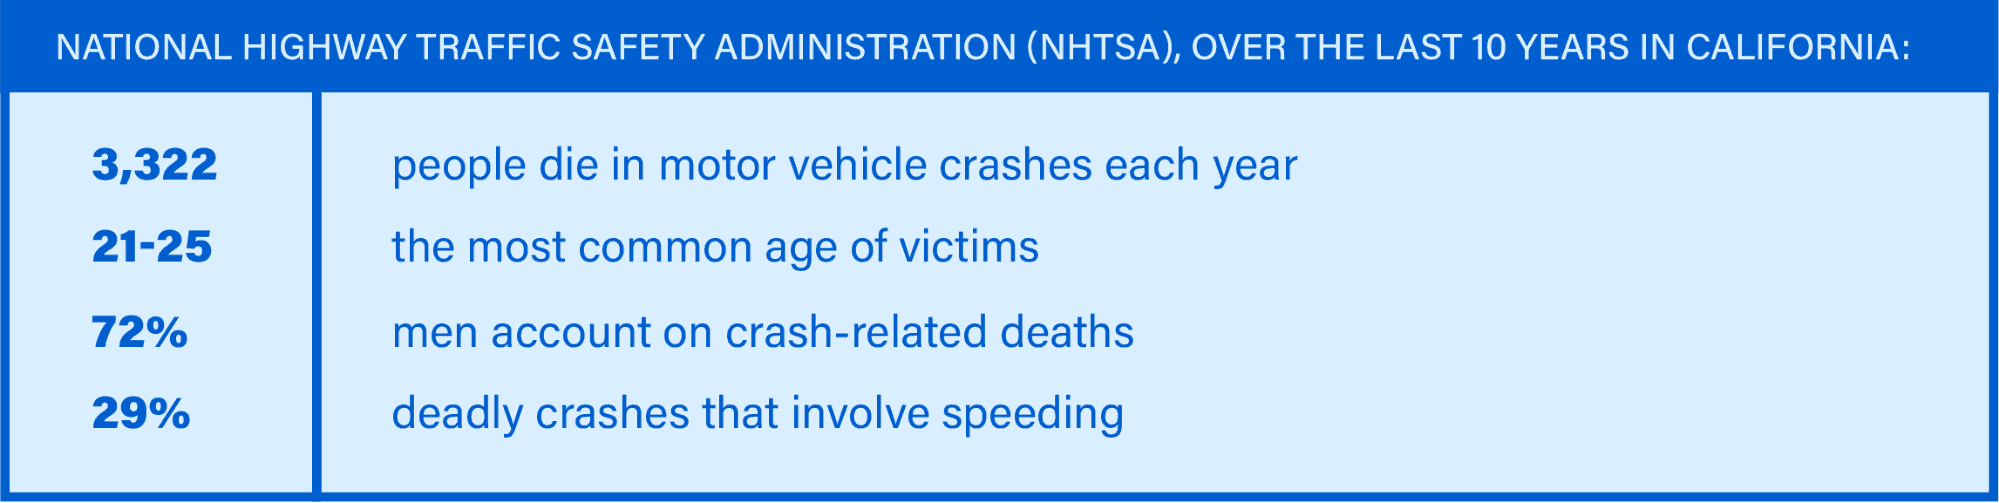 National Highway Traffic Safety Administration (Nhtsa), Over The Last 10 Years In California: